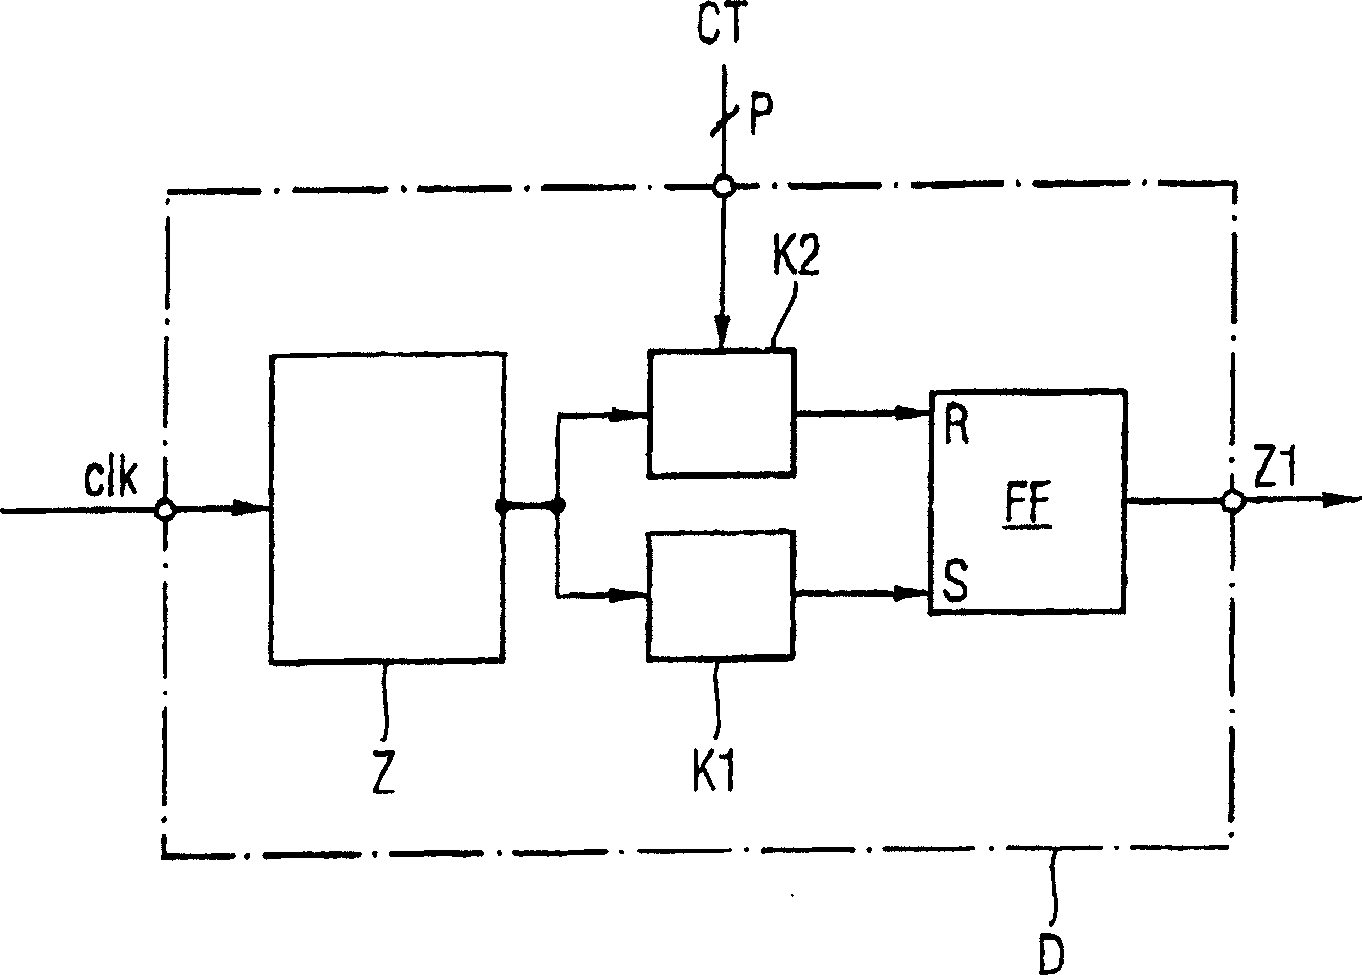 High-resolution digital pulse width modulator and method for generating a high-resolution pulse width modulated signal